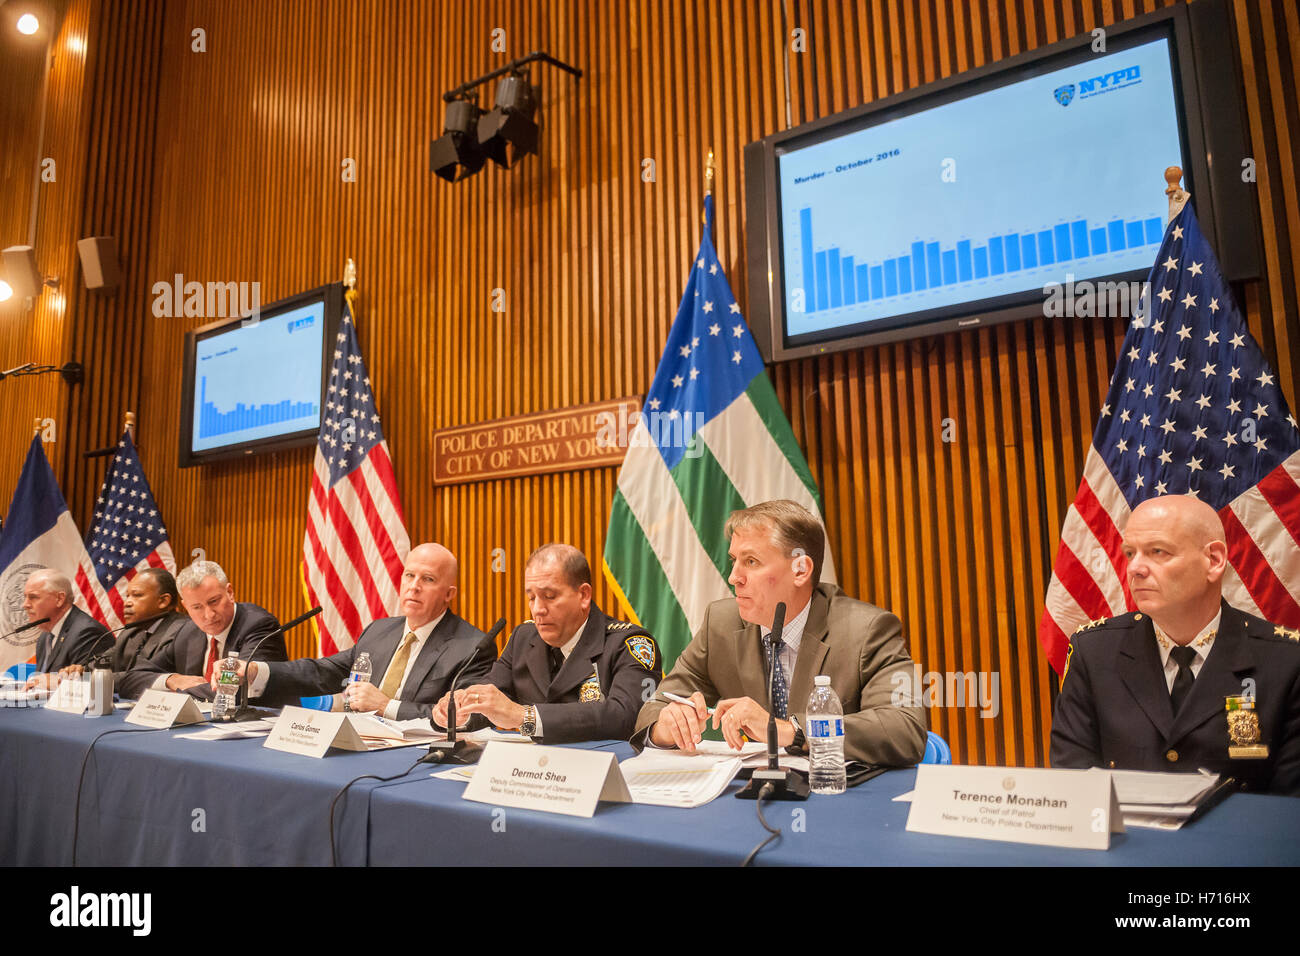 New York Mayor Bill de Blasio, third from left,  and NYPD Commissioner James O'Neill, fourth from left, with other high-ranking members of the NYPD brief the media at their monthly press conference on October crime statistics at One Police Plaza in New York on Tuesday, November 1, 2016.  (© Richard B. Levine) Stock Photo